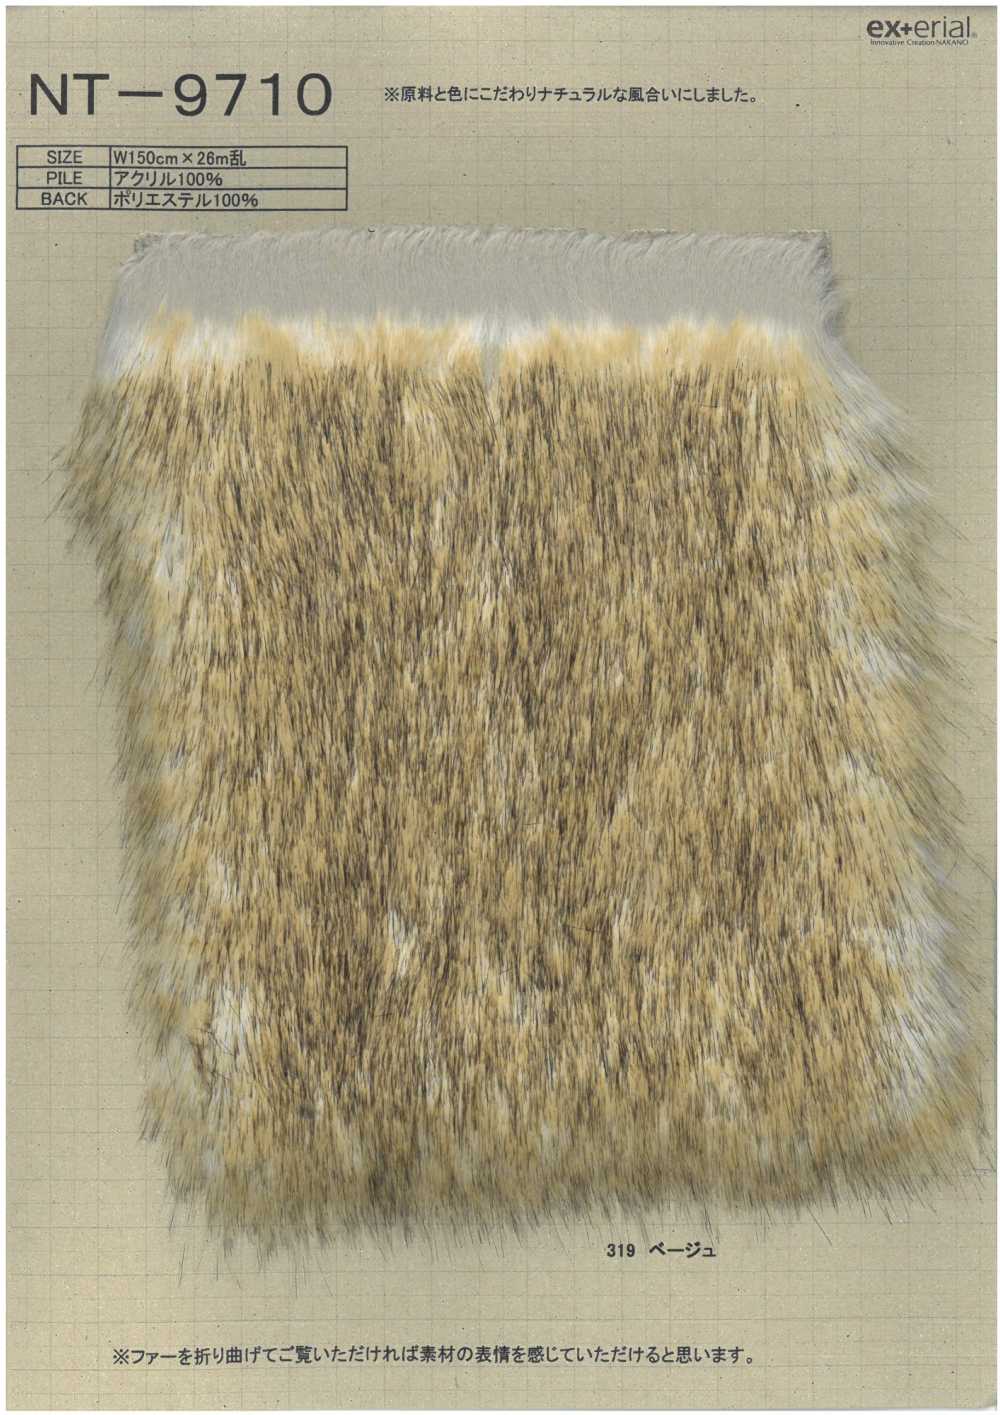 NT-9710 Craft Fur [Fuzzy Lop][Textile / Fabric] Nakano Stockinette Industry